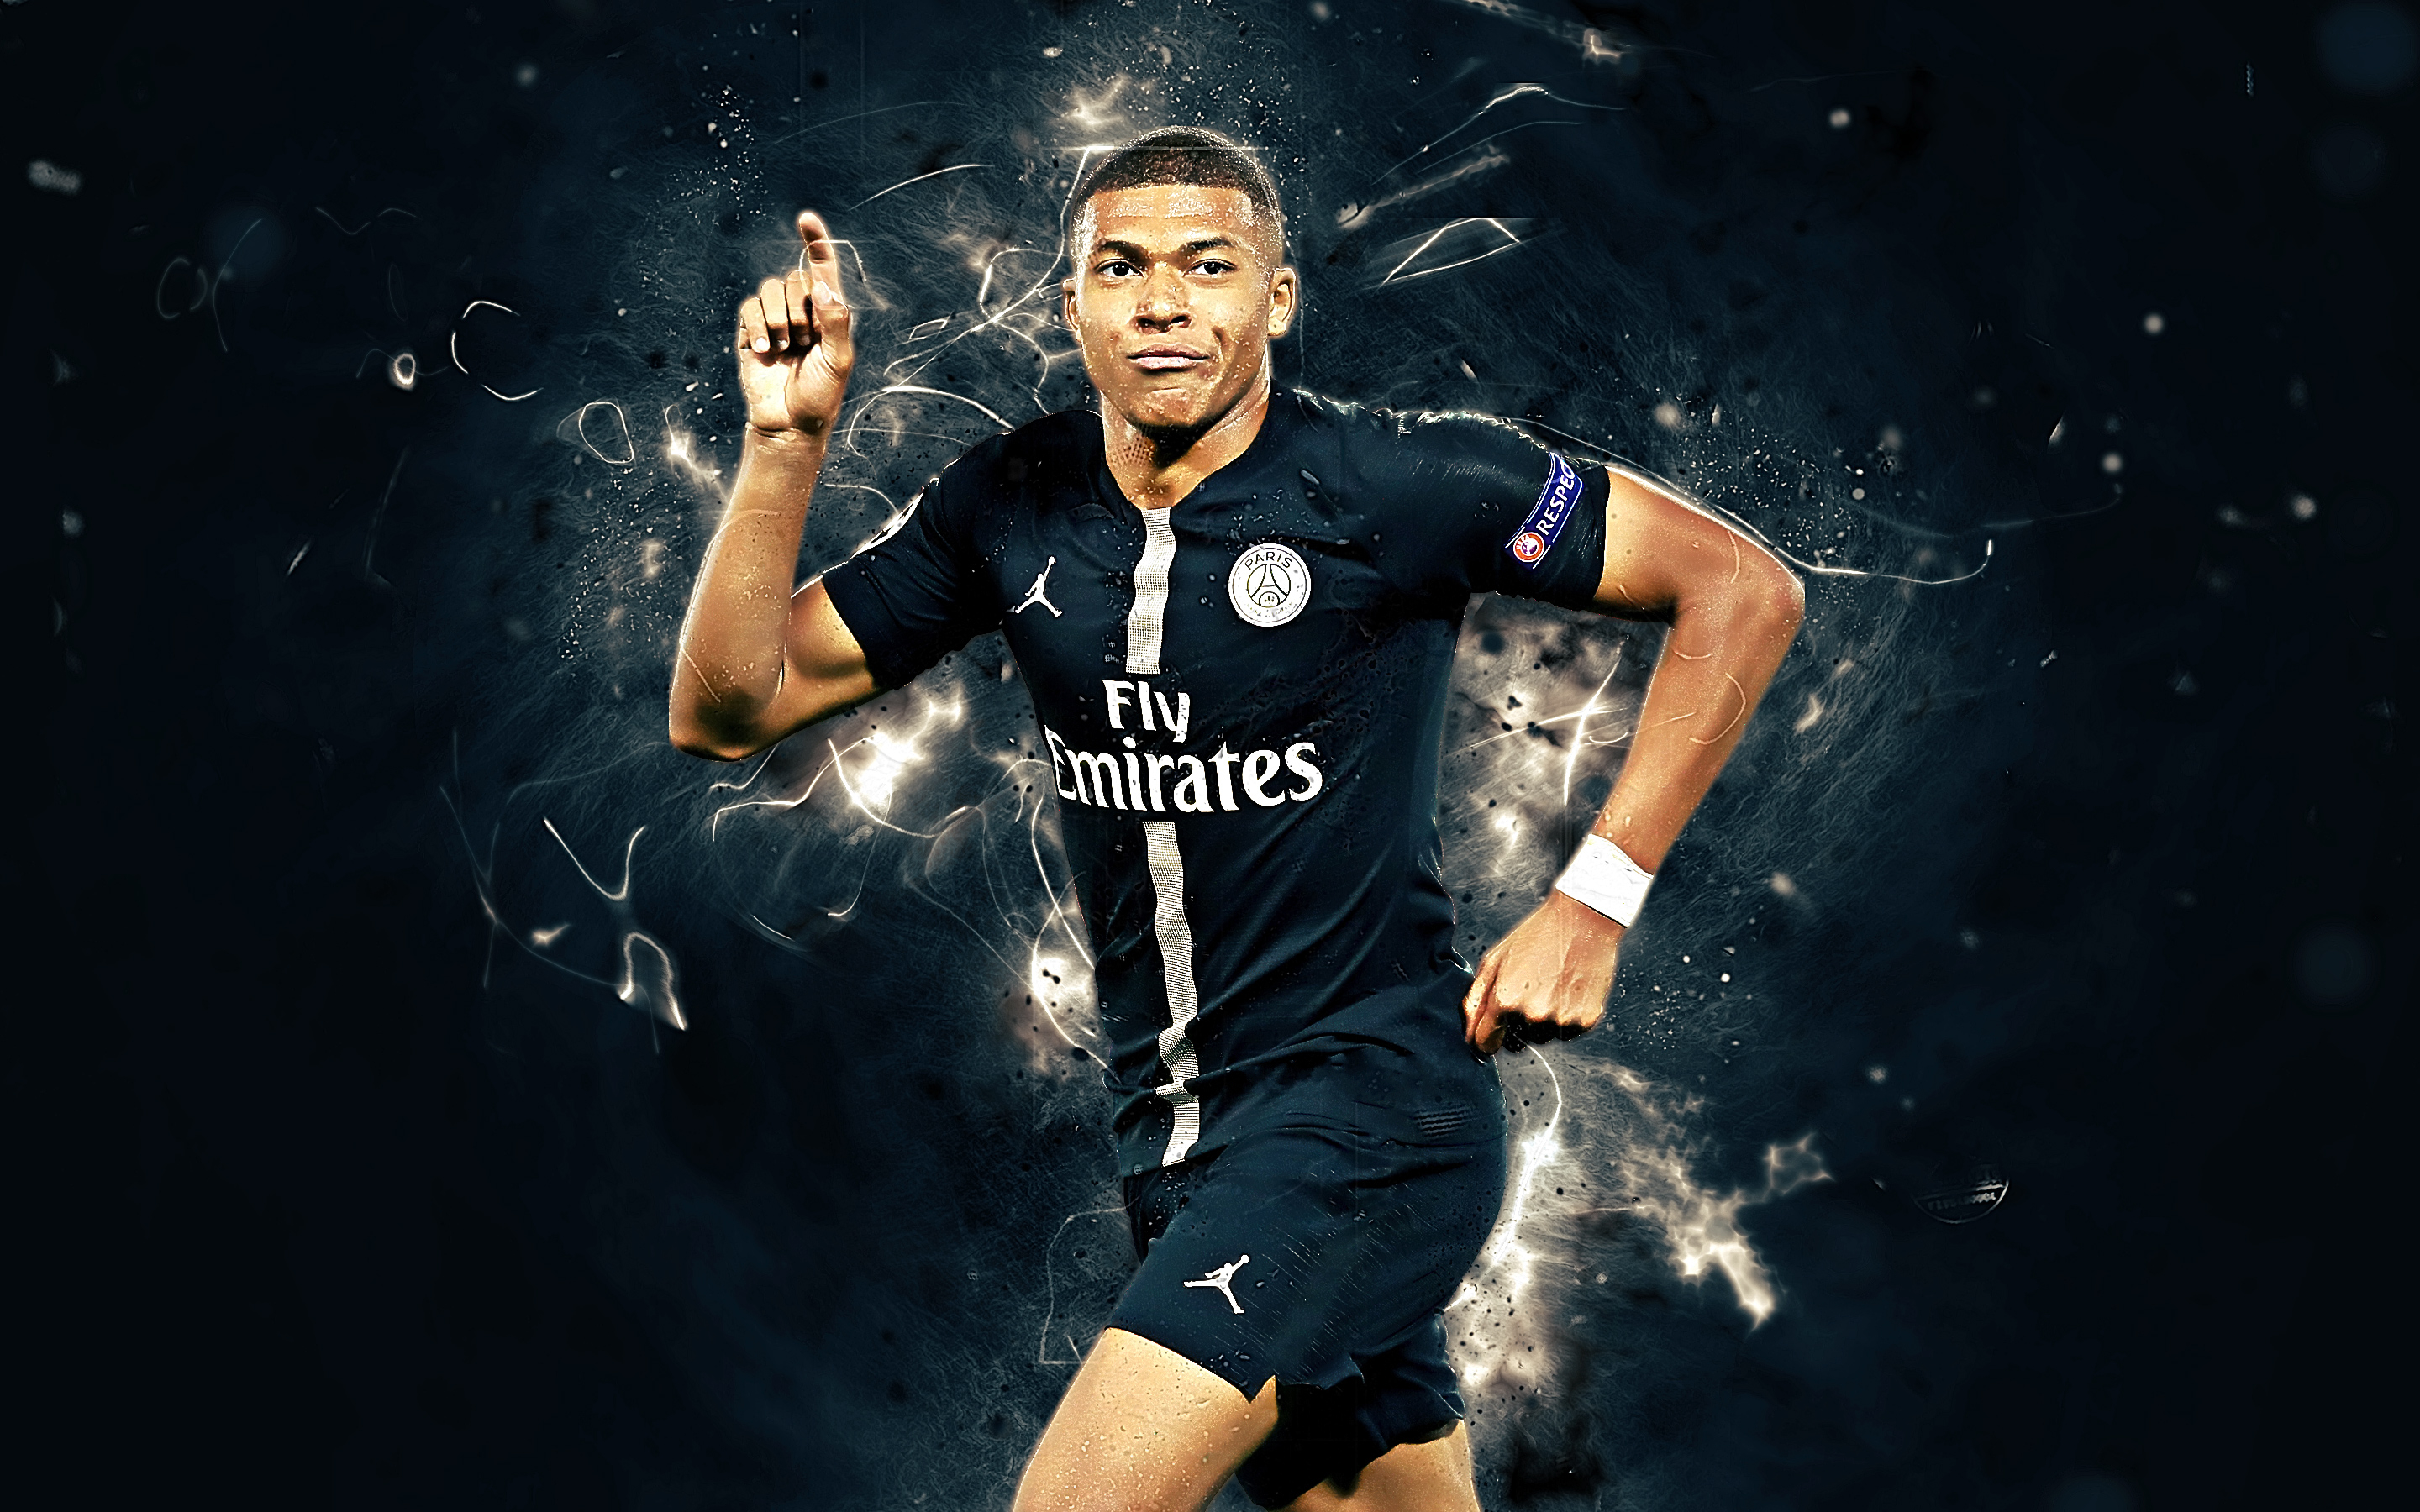 Download Kylian Mbappé wallpaper for mobile phone, free Kylian Mbappé HD picture